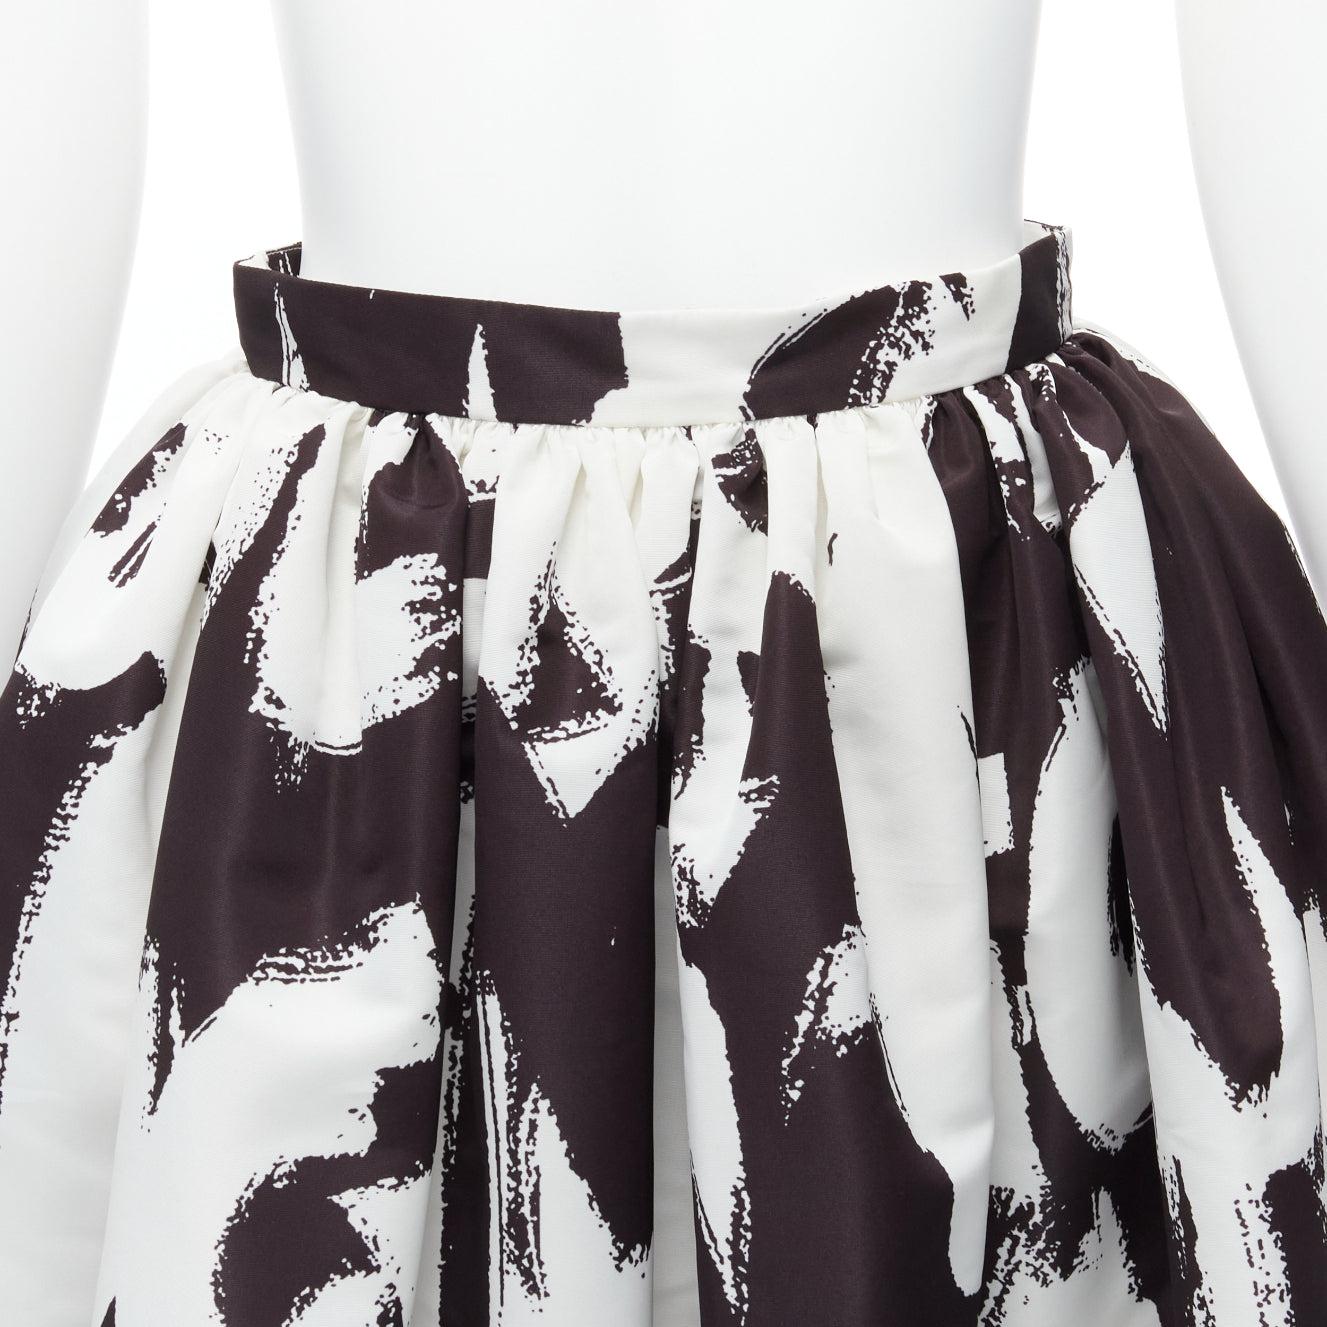 ALEXANDER MCQUEEN 2022 Brush Graffiti black white logo letter print flared full skirt IT38 XS
Reference: AAWC/A00497
Brand: Alexander McQueen
Designer: Sarah Burton
Collection: 2022
Material: Polyester
Color: Black, White
Pattern: Abstract
Closure: